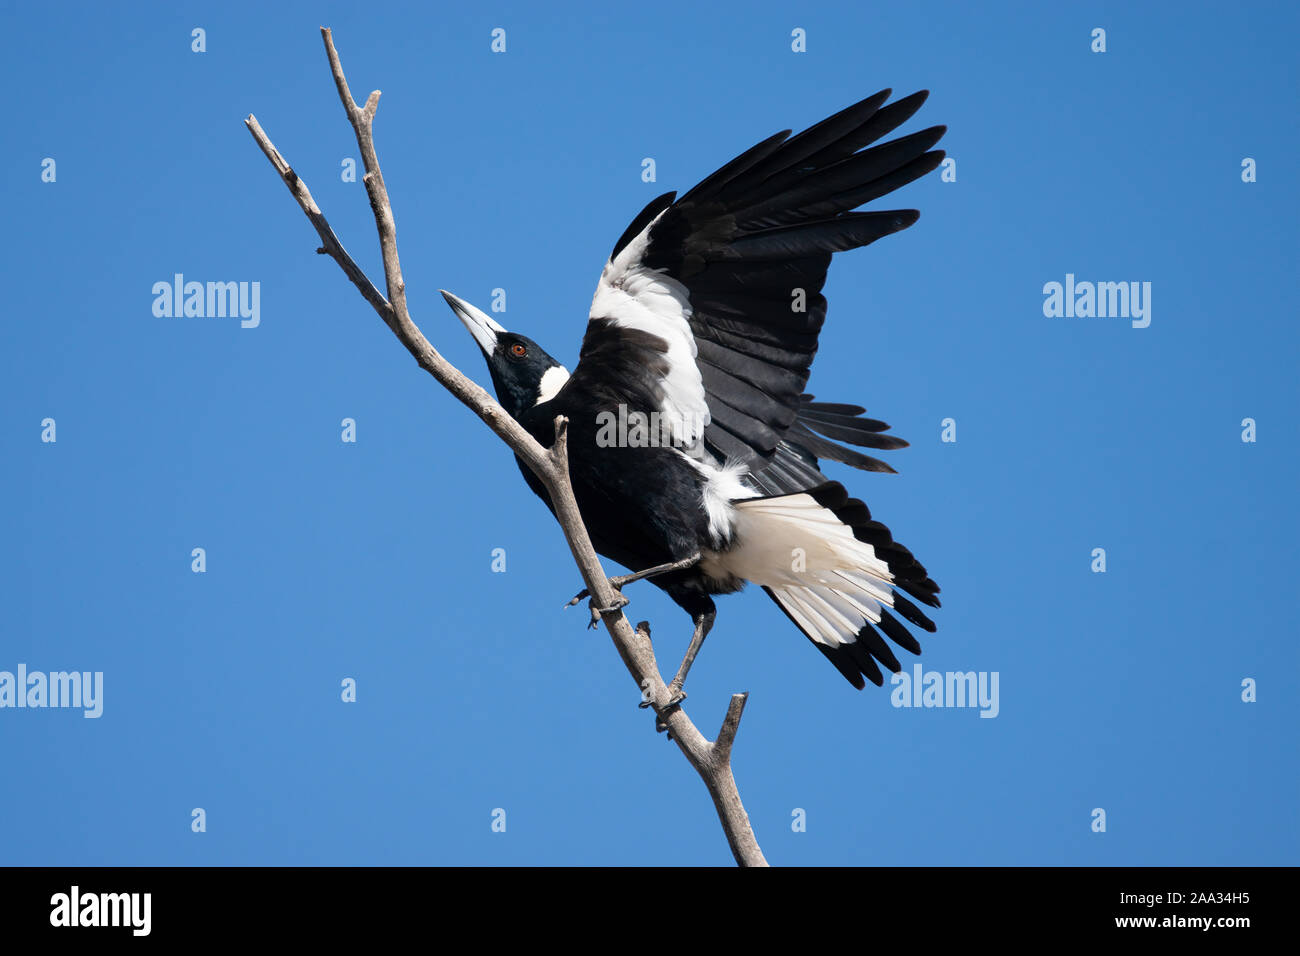 An Australian Magpie perched on a dead branch against a clear blue sky Stock Photo